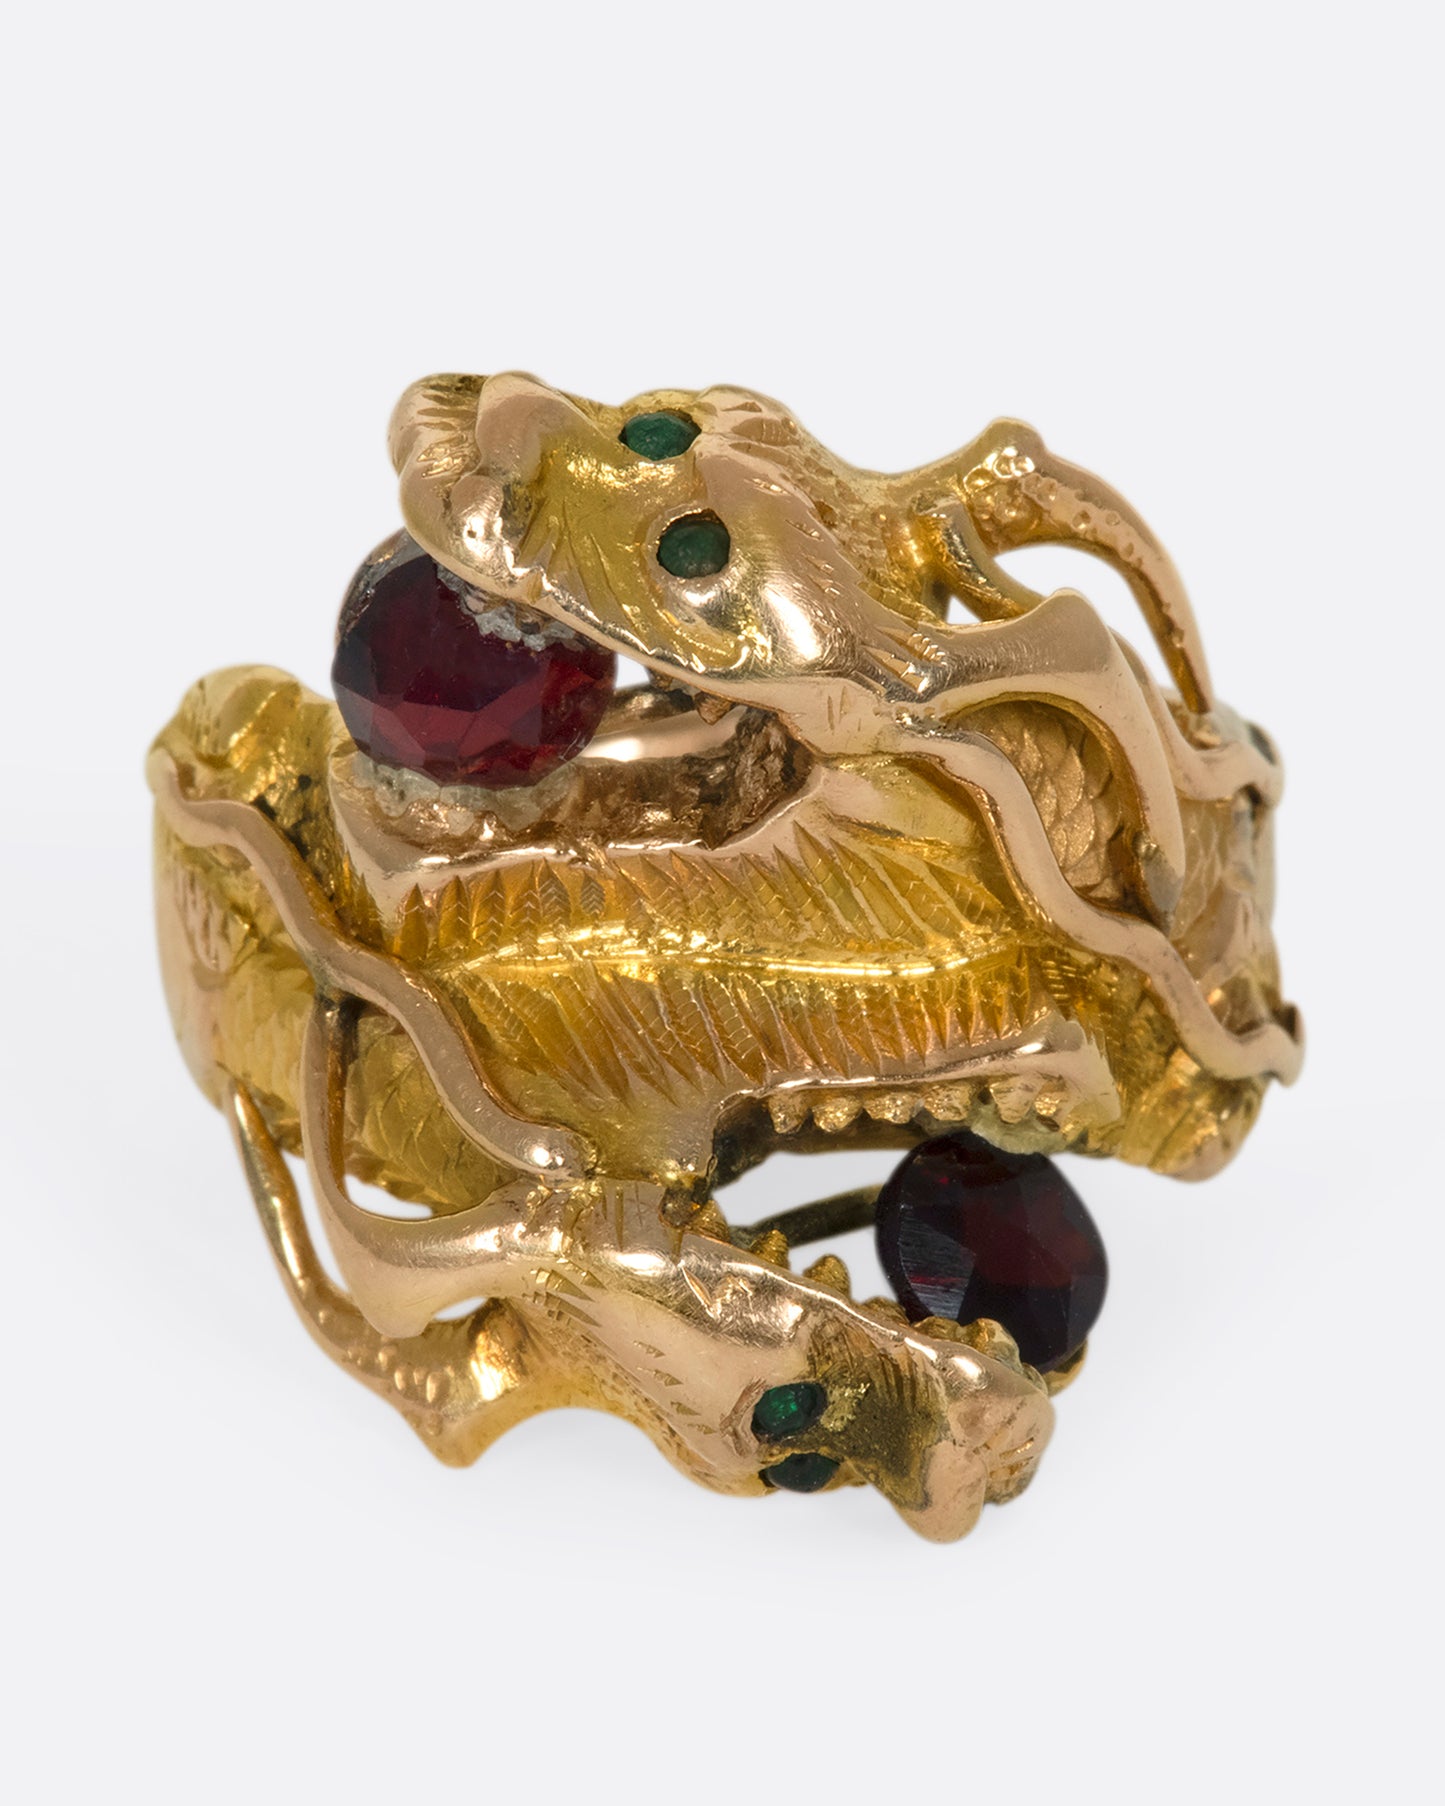 A close up view of a yellow gold ring with two wrapped dragons, each with emerald eyes and garnets in their mouths.